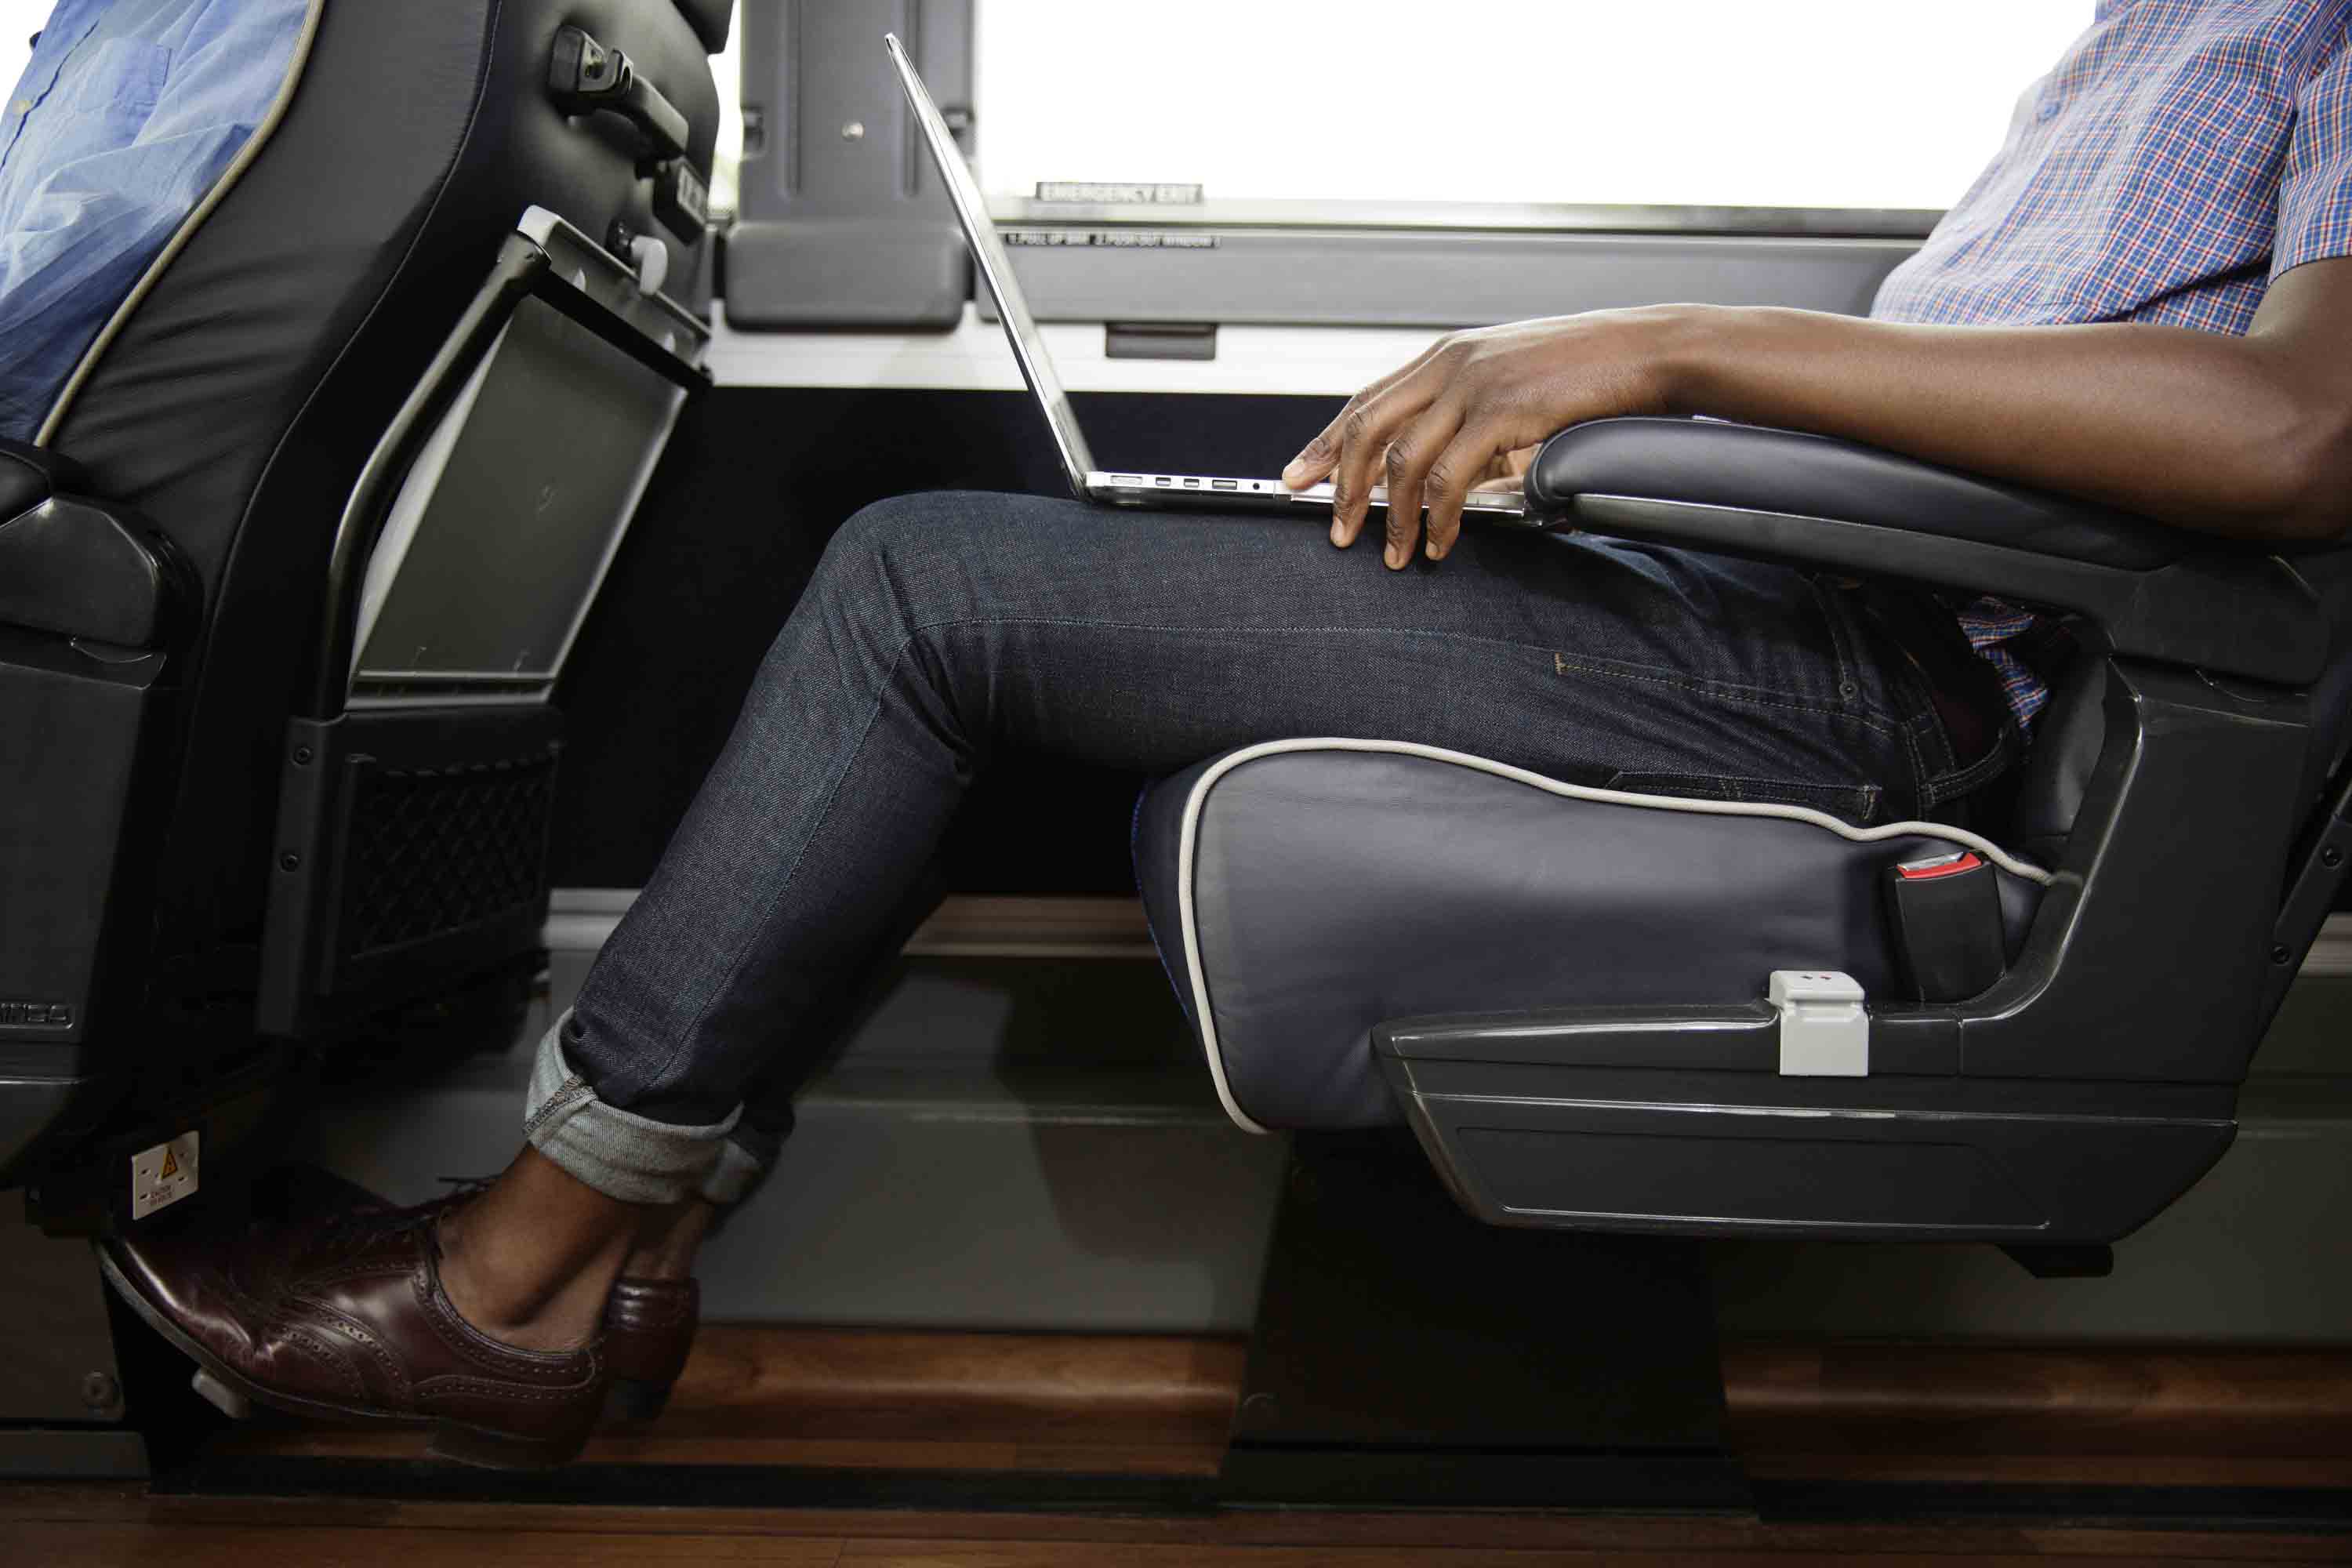 Leg Room and a laptop